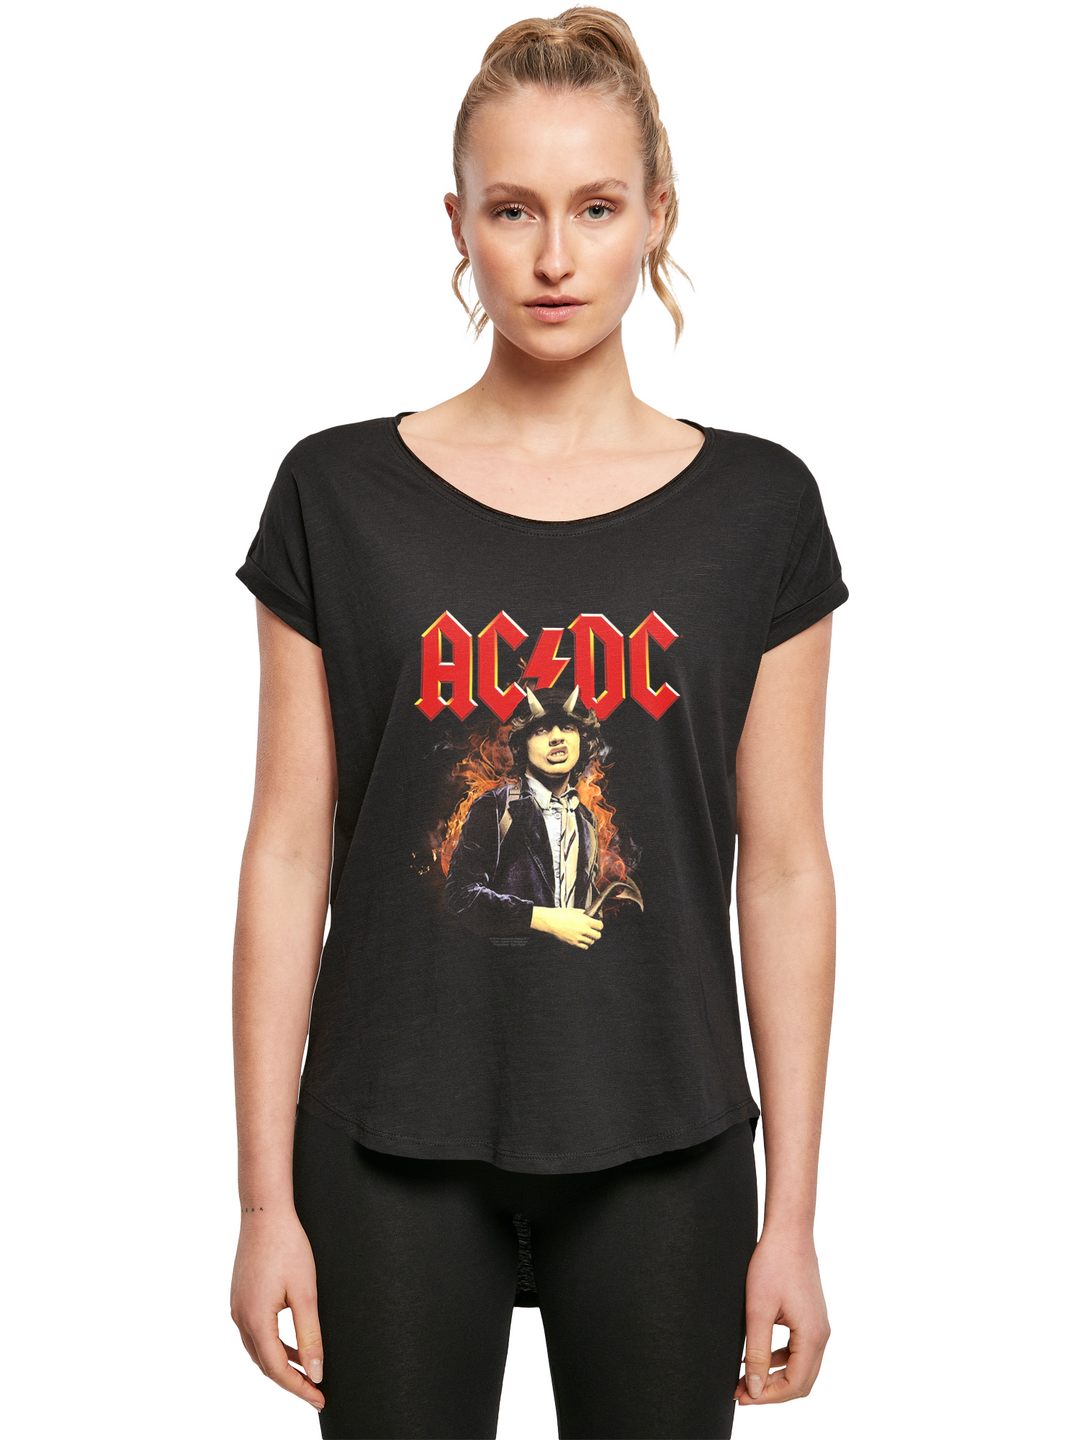 ACDC Angus Highway To Hell with Ladies Long Slub Tee